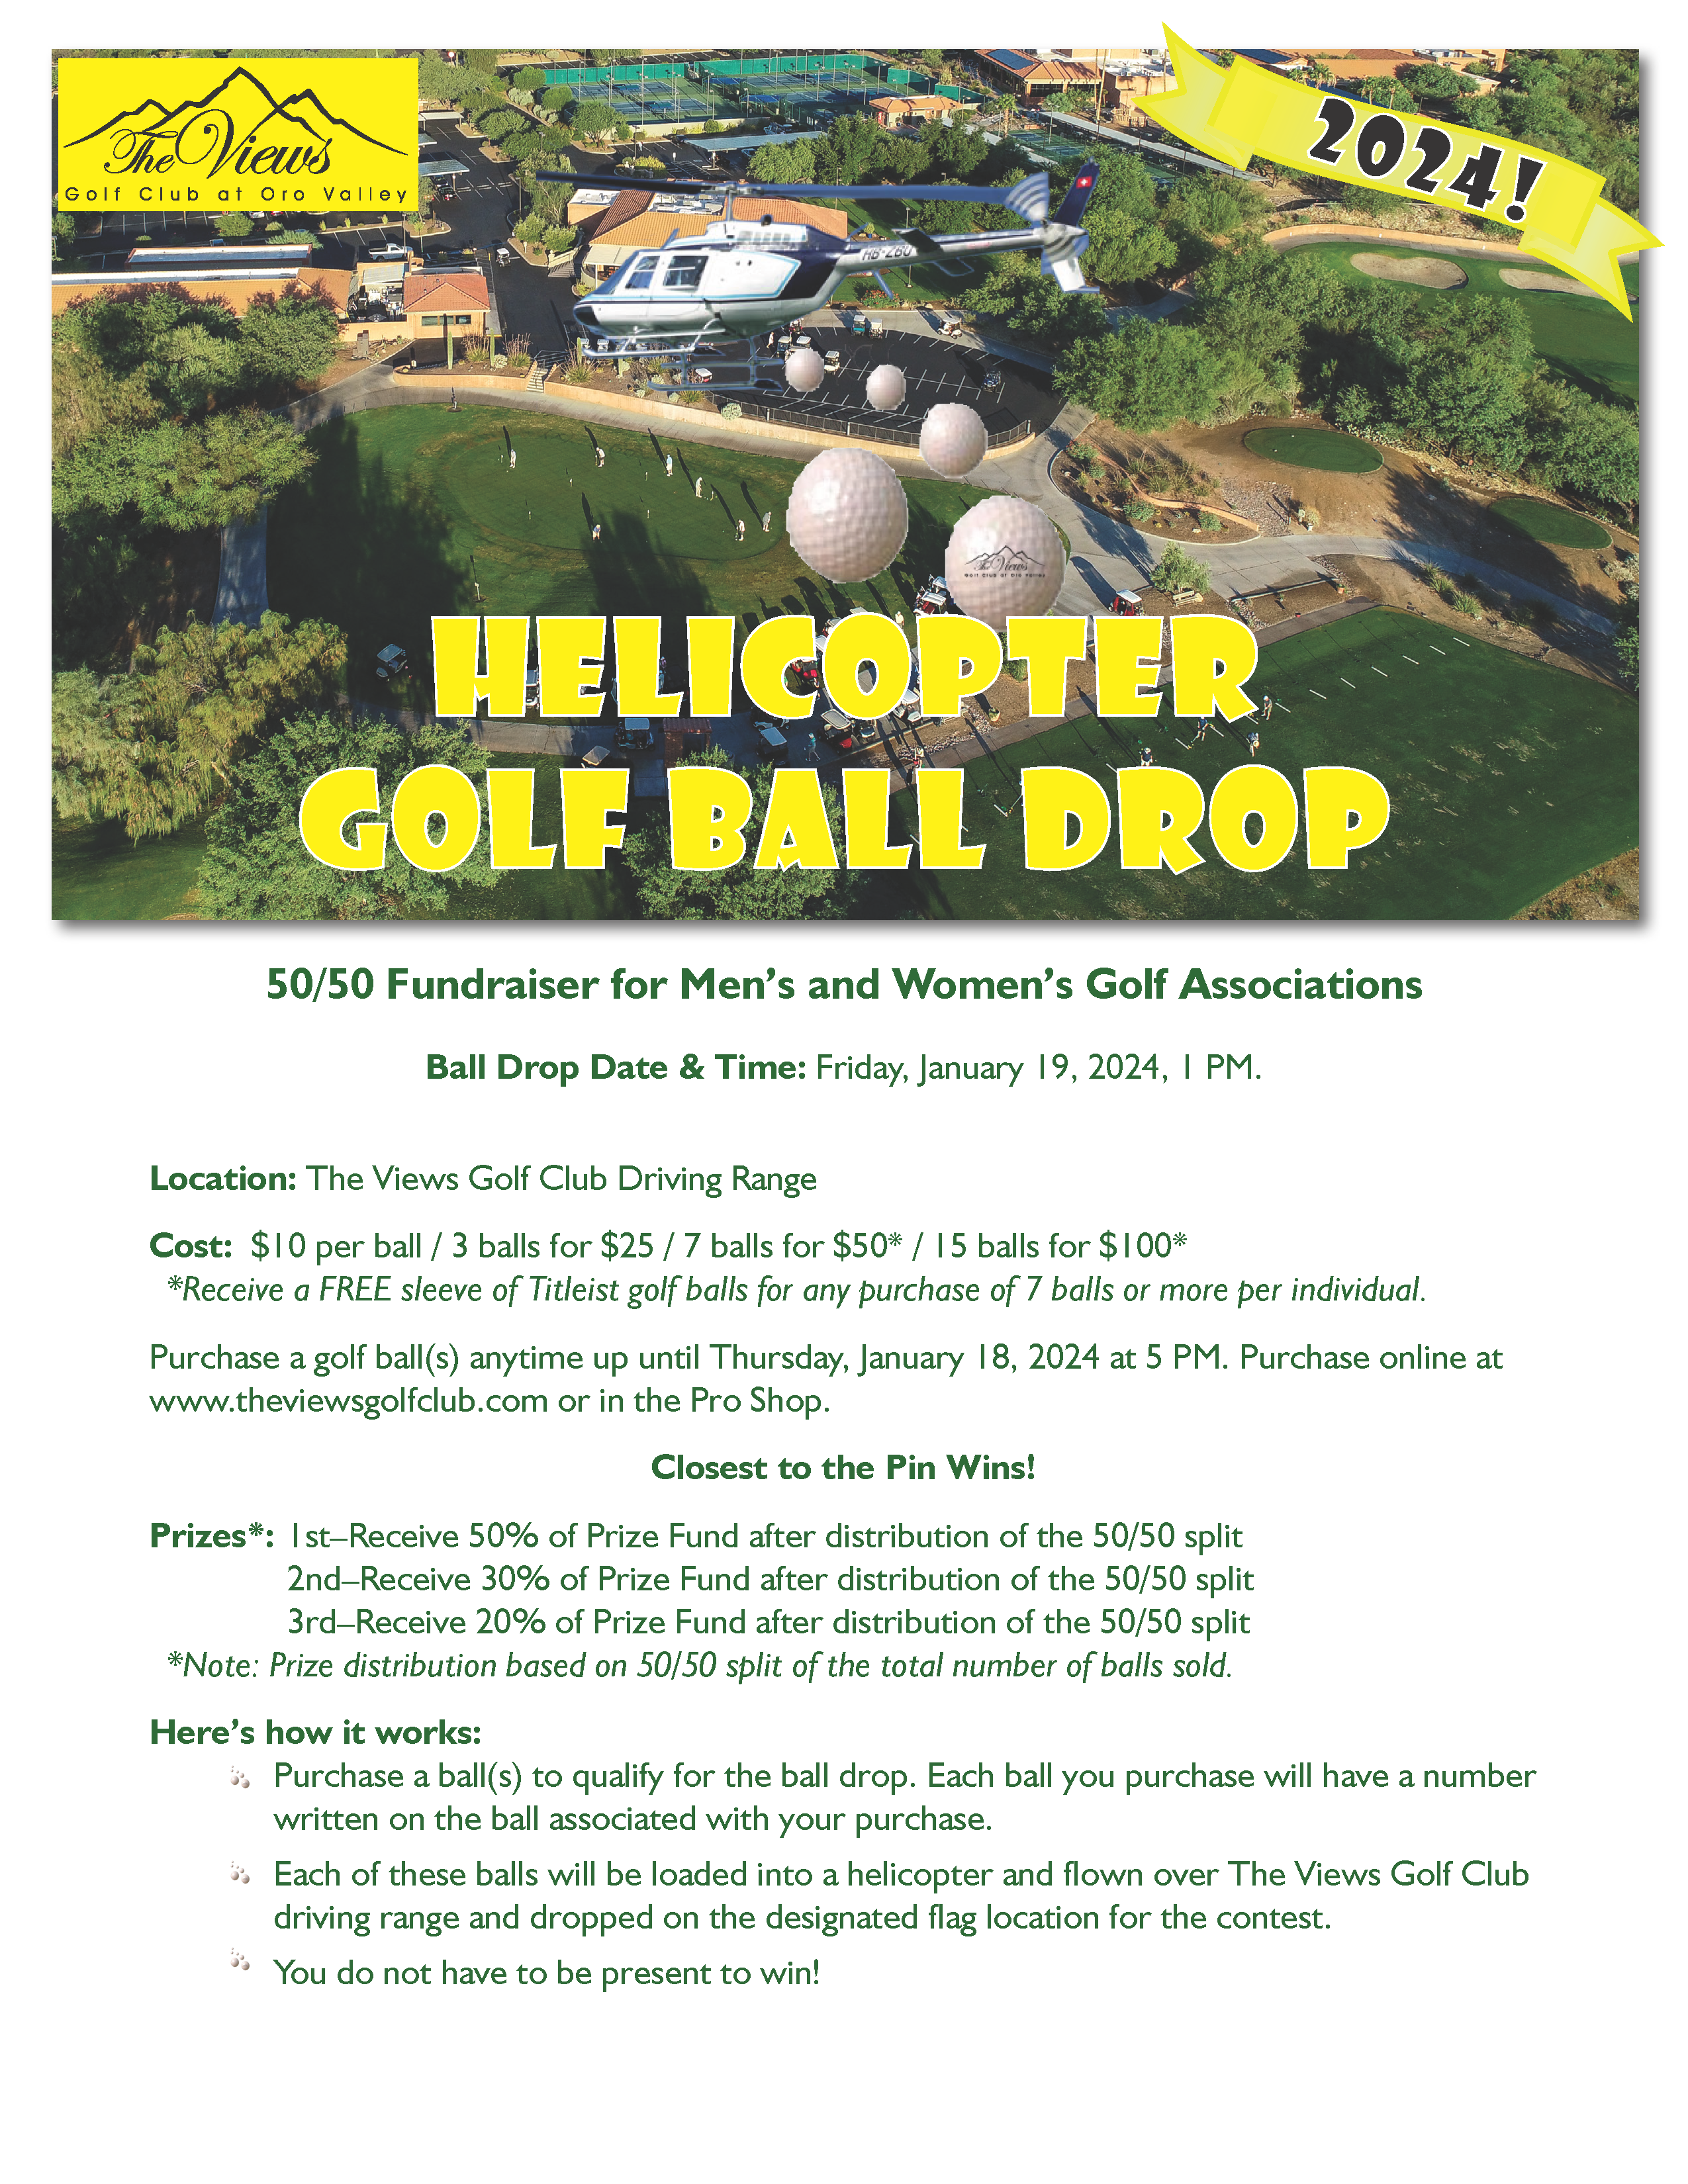 Helicopter Ball Drop flyer 2024